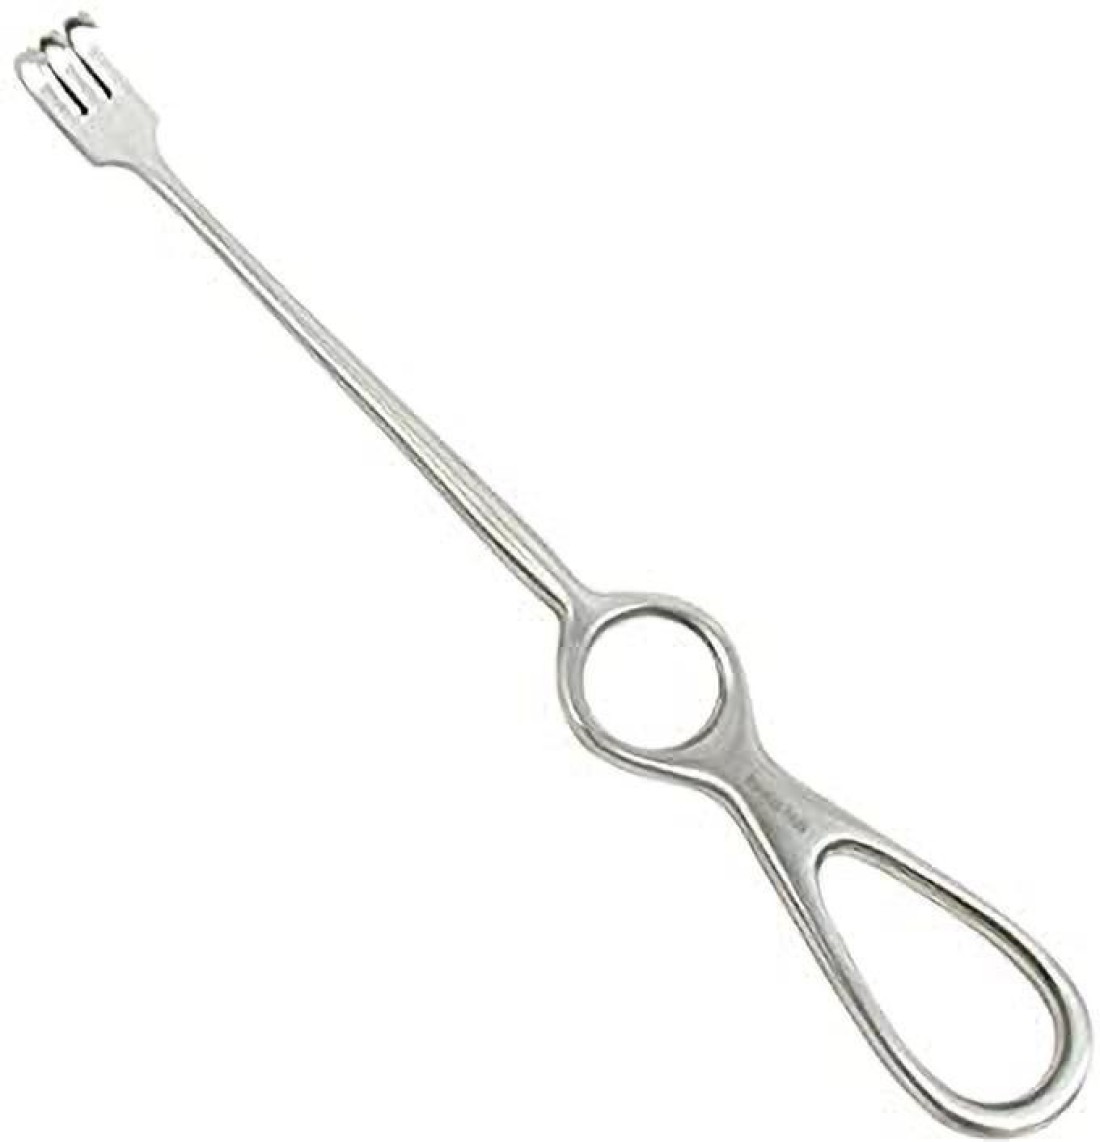 REVITI Skin Hook Surgical Retractor 2 prong medical forcep Hand Held  Retractor Price in India - Buy REVITI Skin Hook Surgical Retractor 2 prong  medical forcep Hand Held Retractor online at